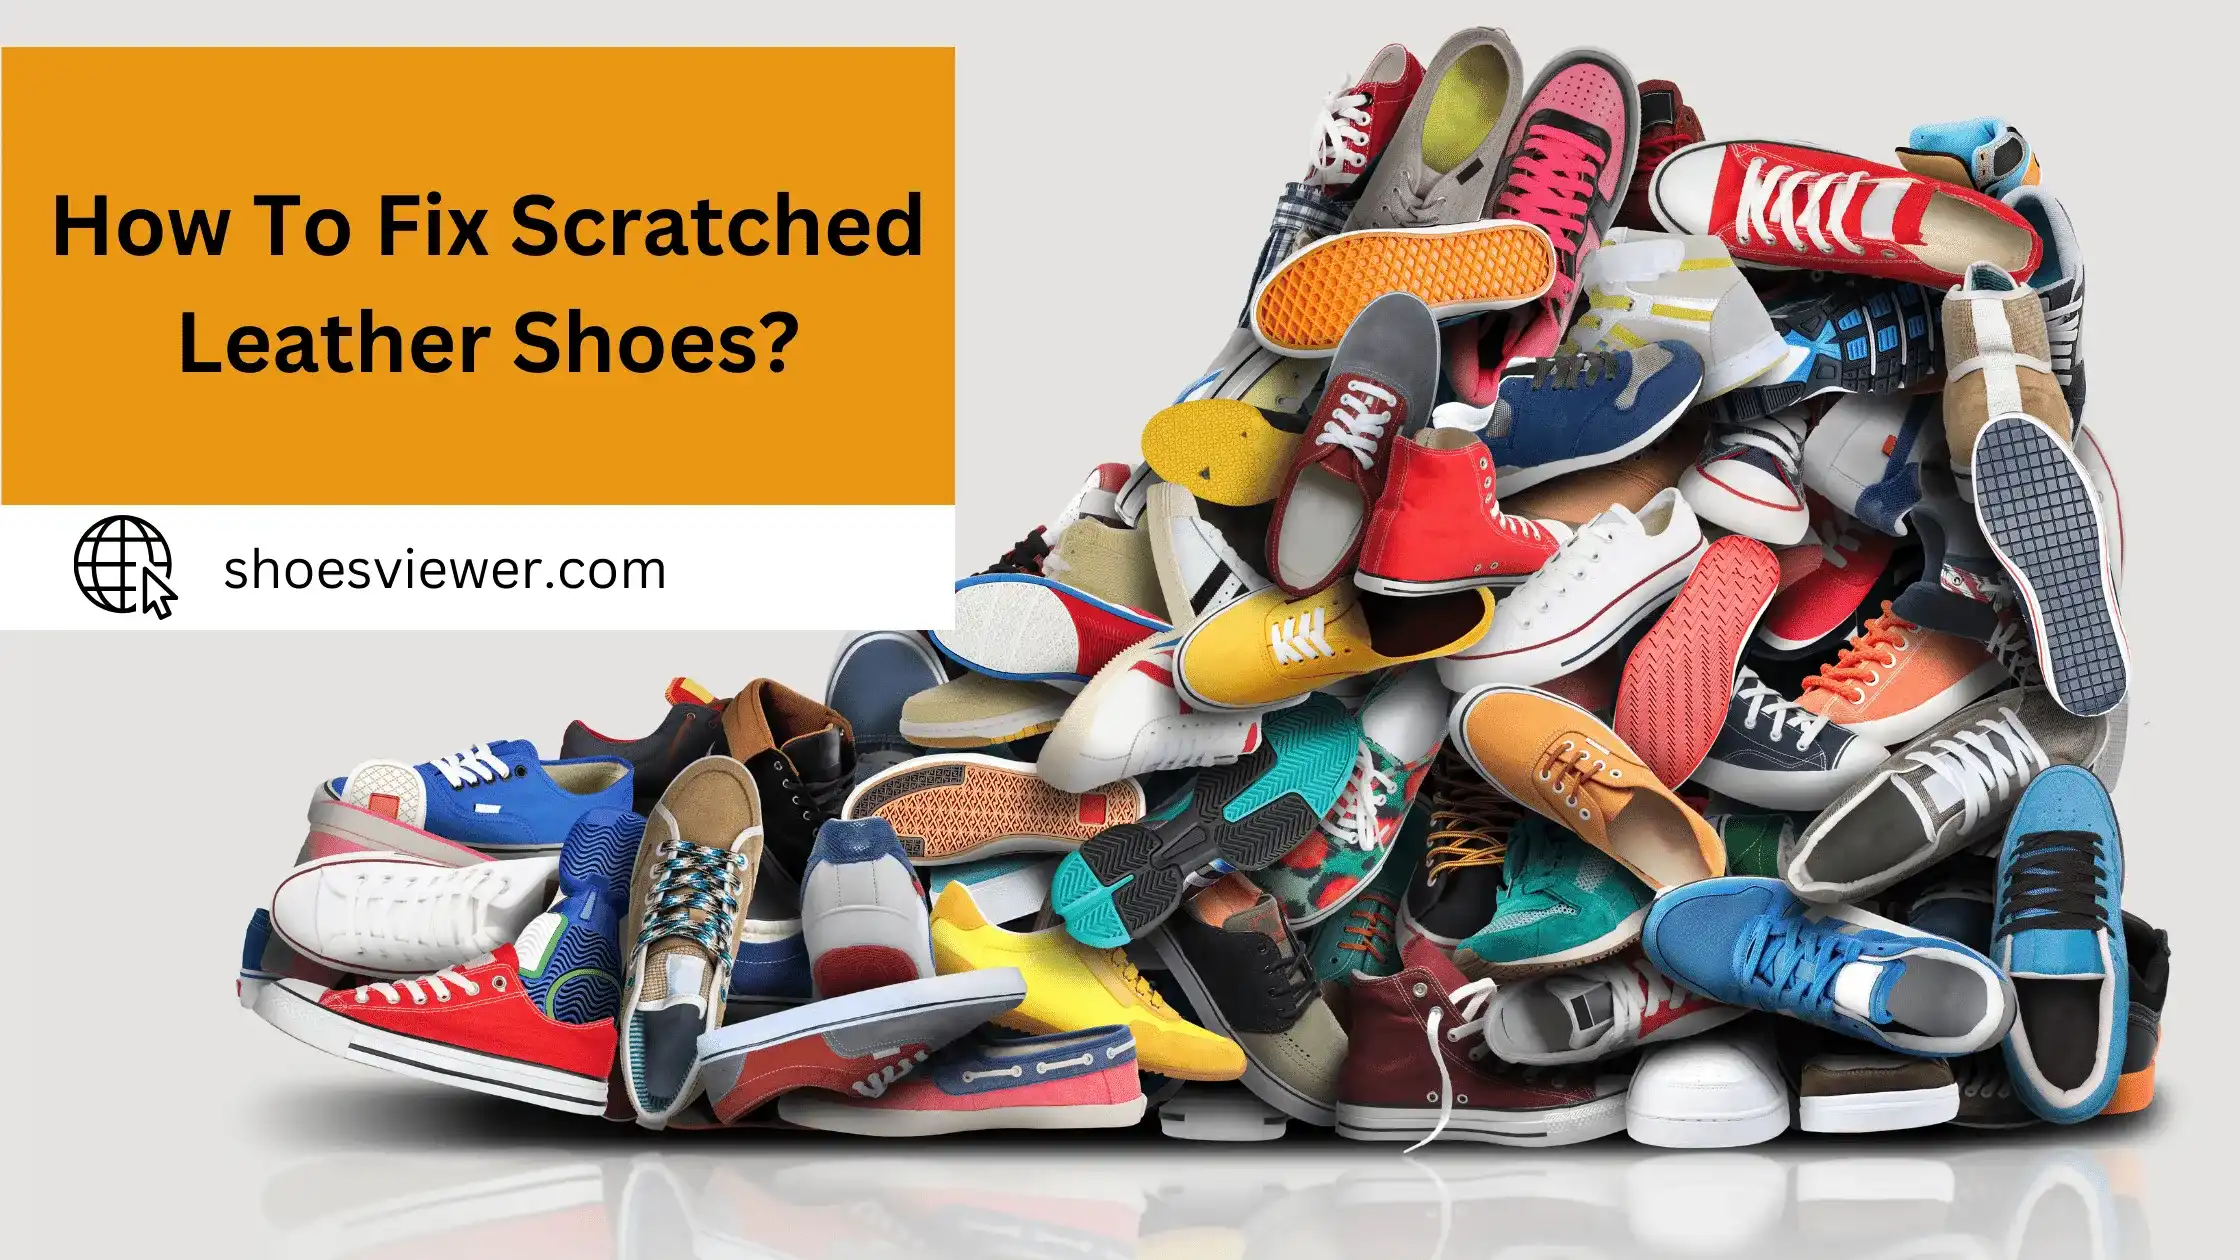 How To Fix Scratched Leather Shoes? Quick Solutions